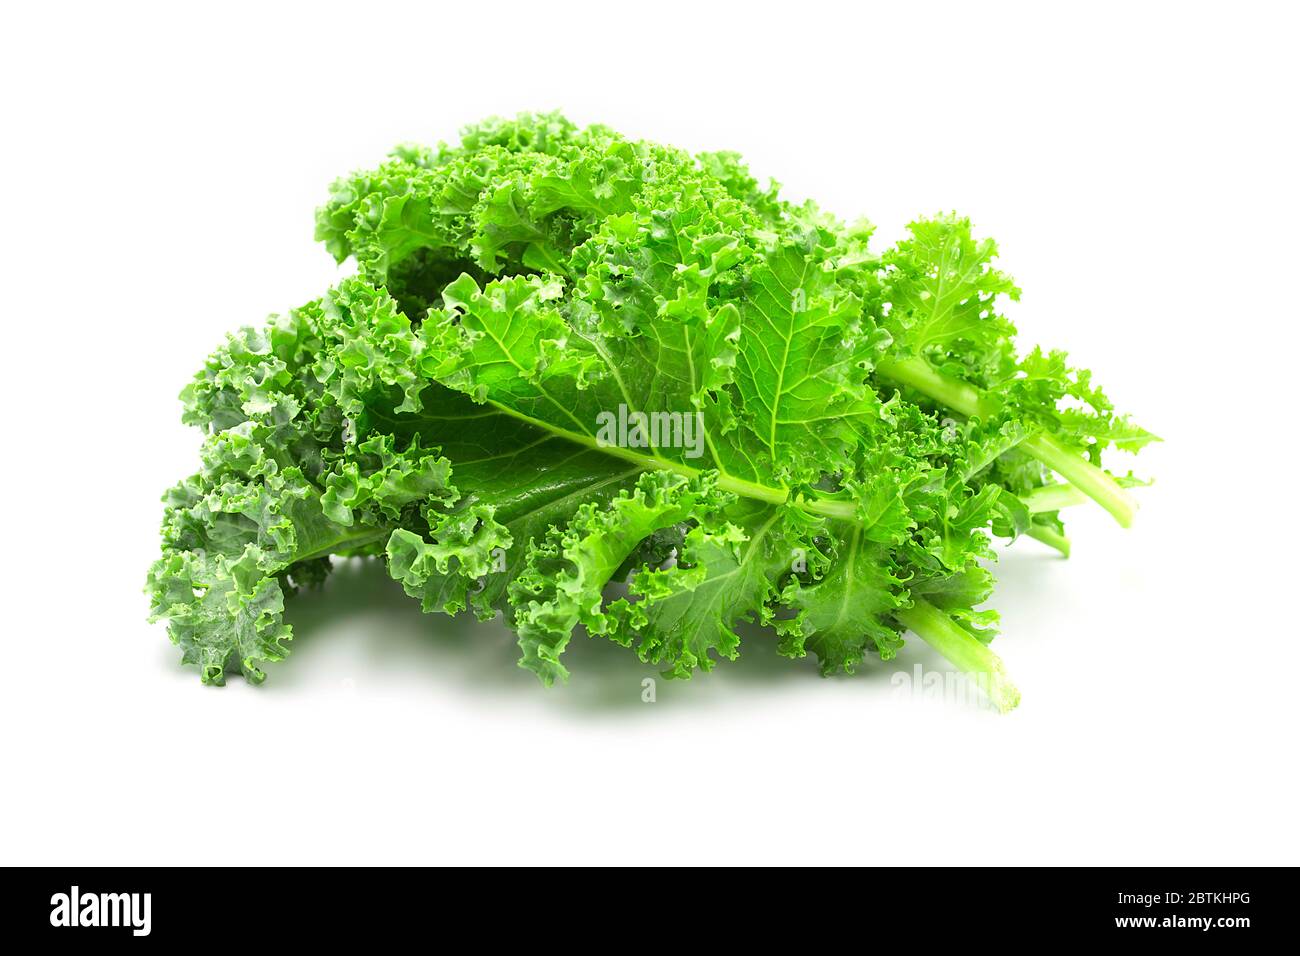 Fresh raw organic green kale leaf heap on white isolated background. Kale is healthy Superfood for diet, have omega 3, protein, vitamins and mineral. Stock Photo